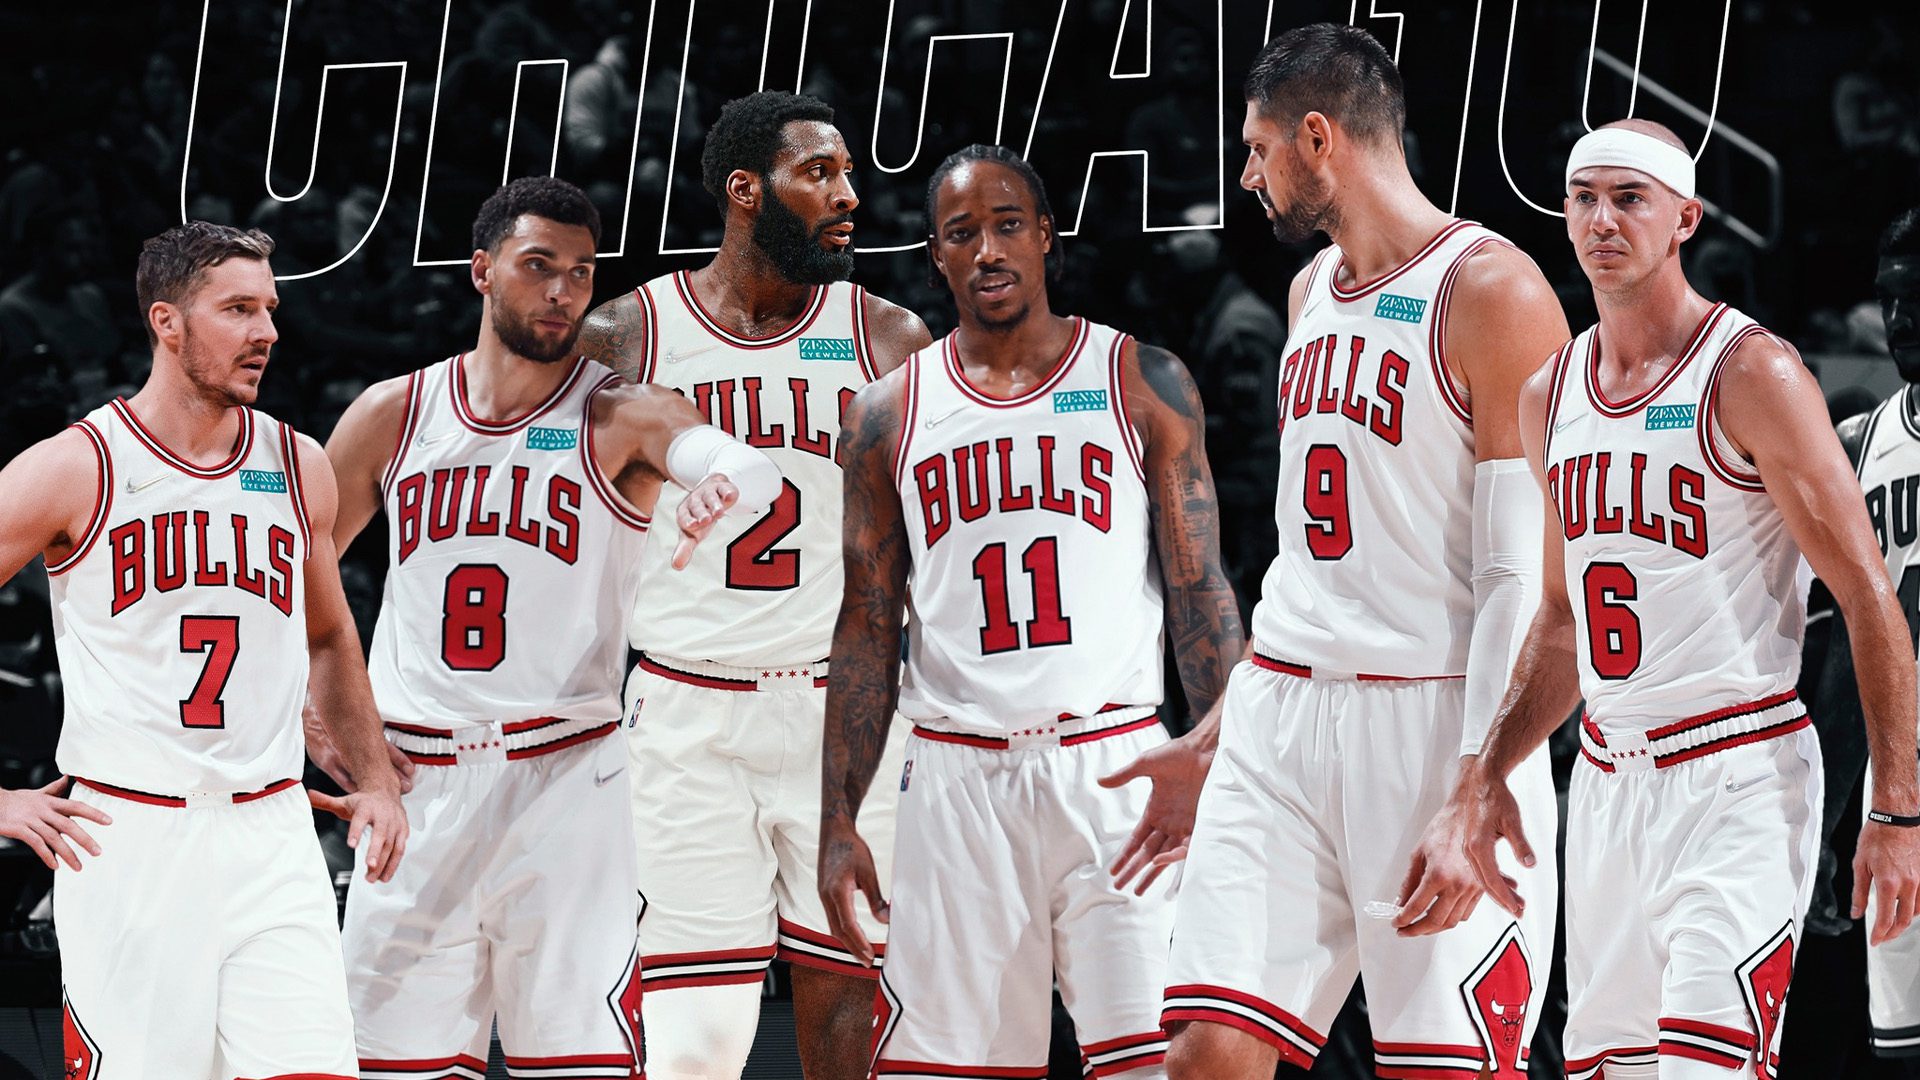 Maldito medio Oculto Reports of Movement on Chicago Bulls Blowing Up Their Roster